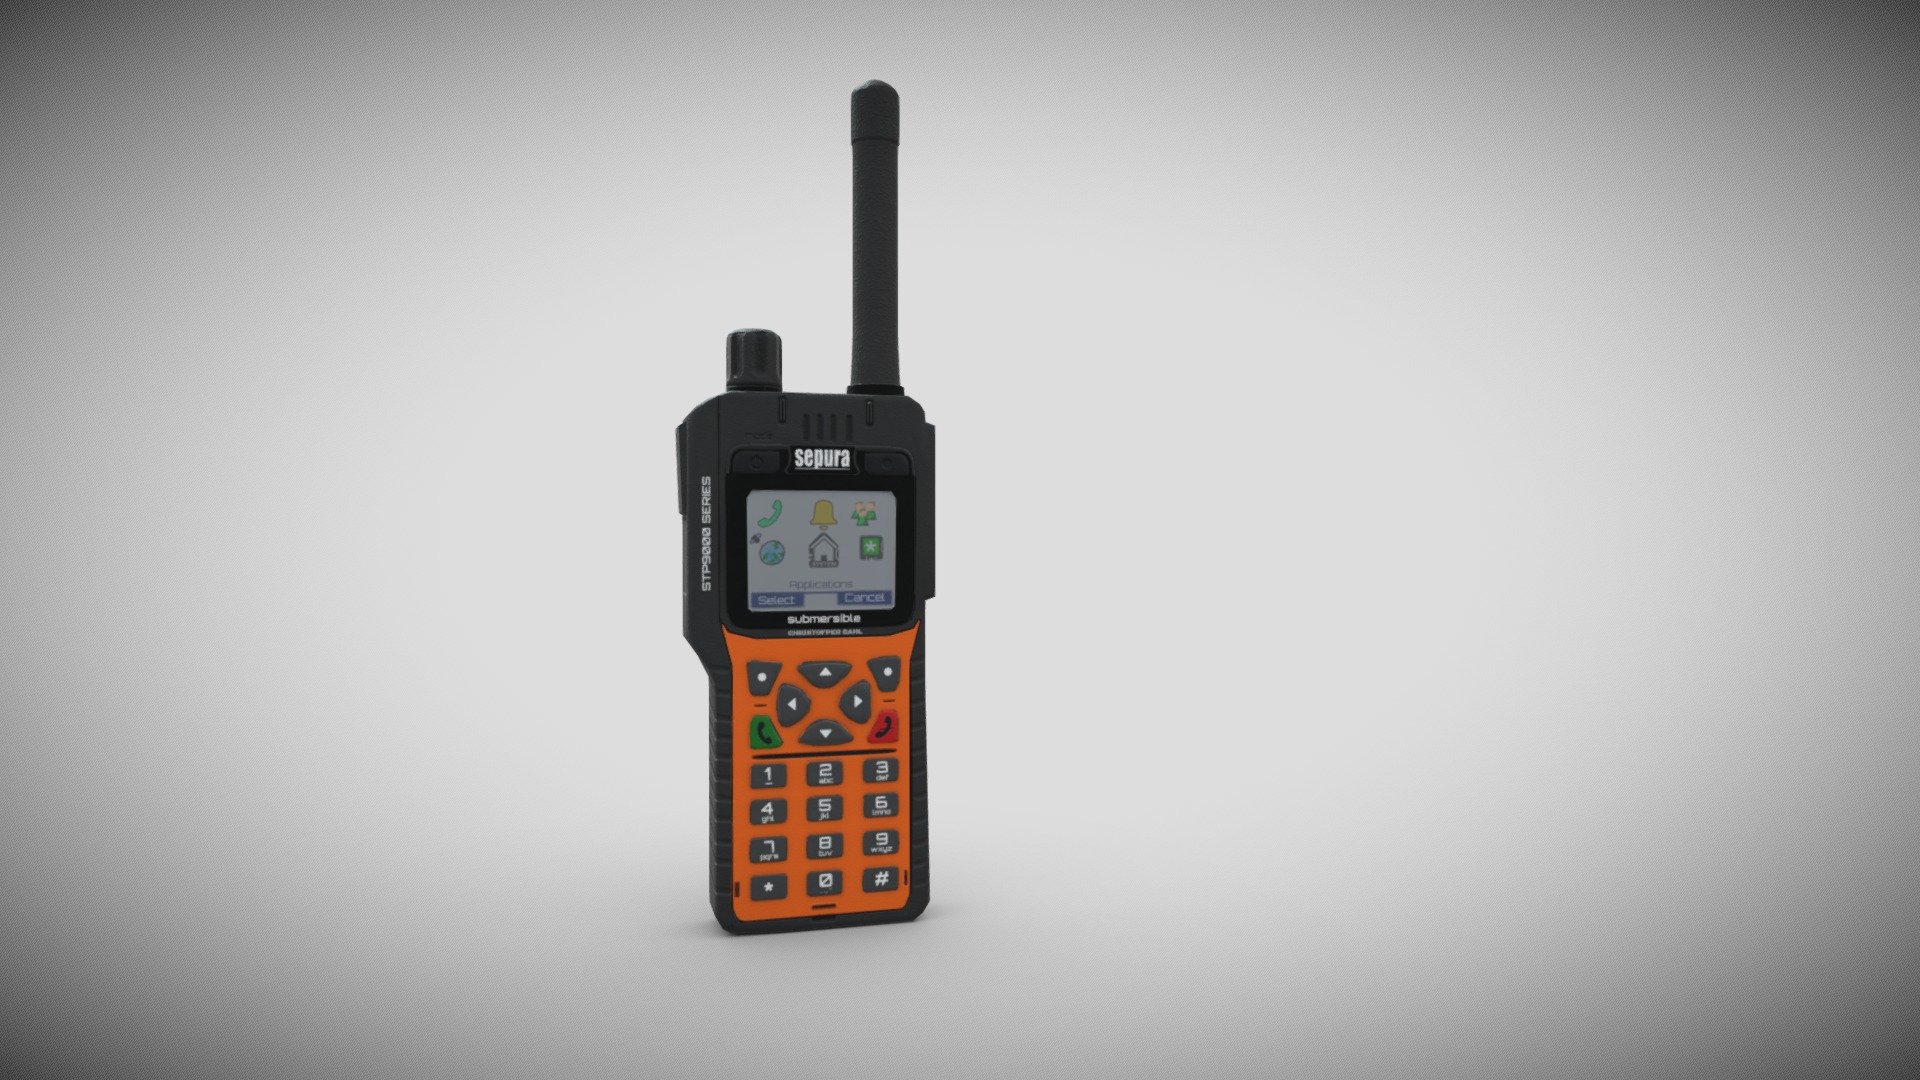 I made a Sepura STP9000 for fun, was inspired from the Norwegian emergency radios we use.
Project took me around 1 day with both model and texturing
Hope you enjoy! - Sepura STP9000 - 3D model by NovelaxNeko (@Christopfer.Dahl) 3d model